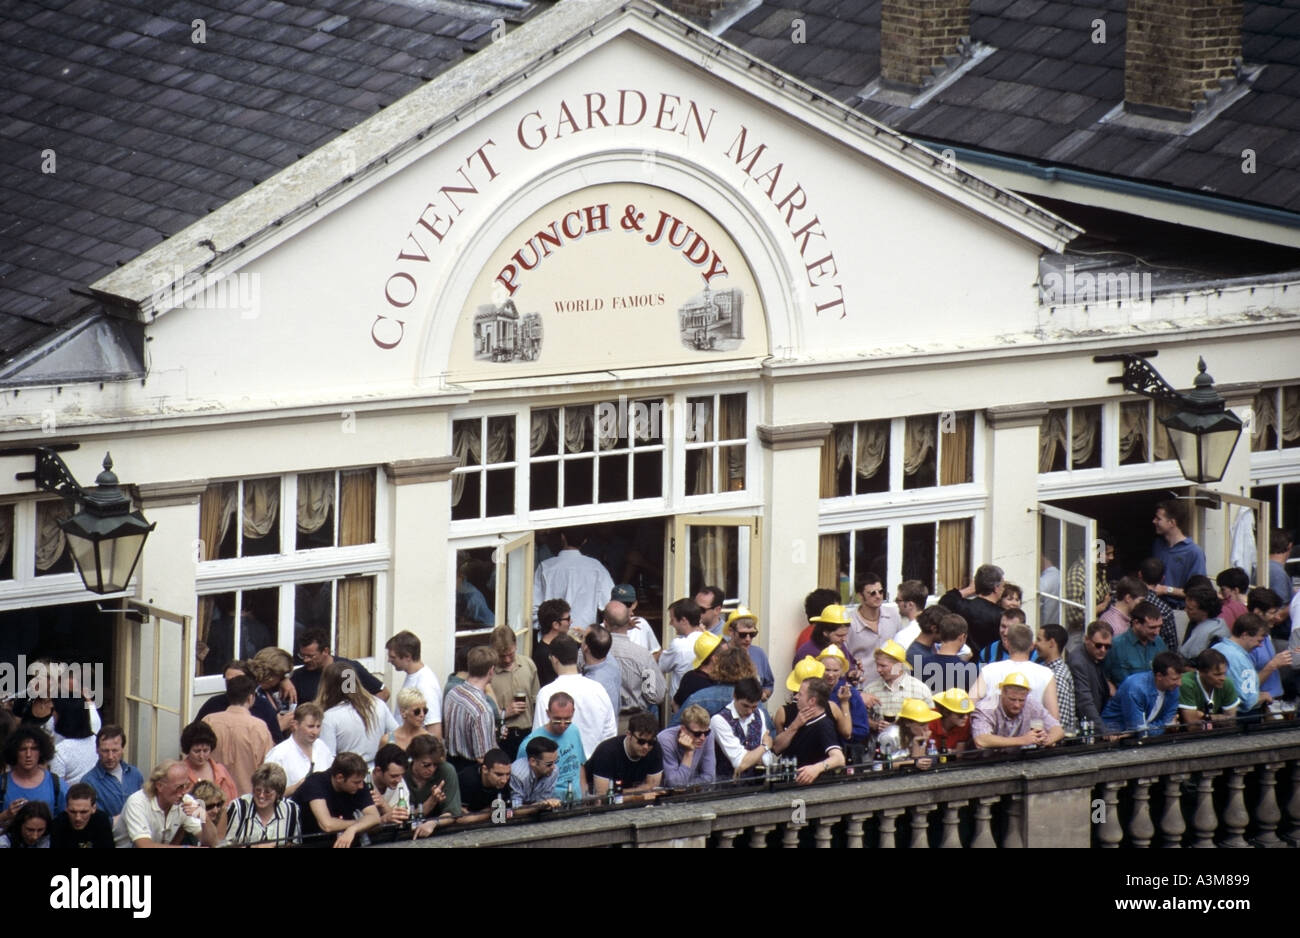 Covent Garden Market Punch & Judy pub close up view of crowd seen from  above looking down on people drinking outside world famous balcony London  UK Stock Photo - Alamy